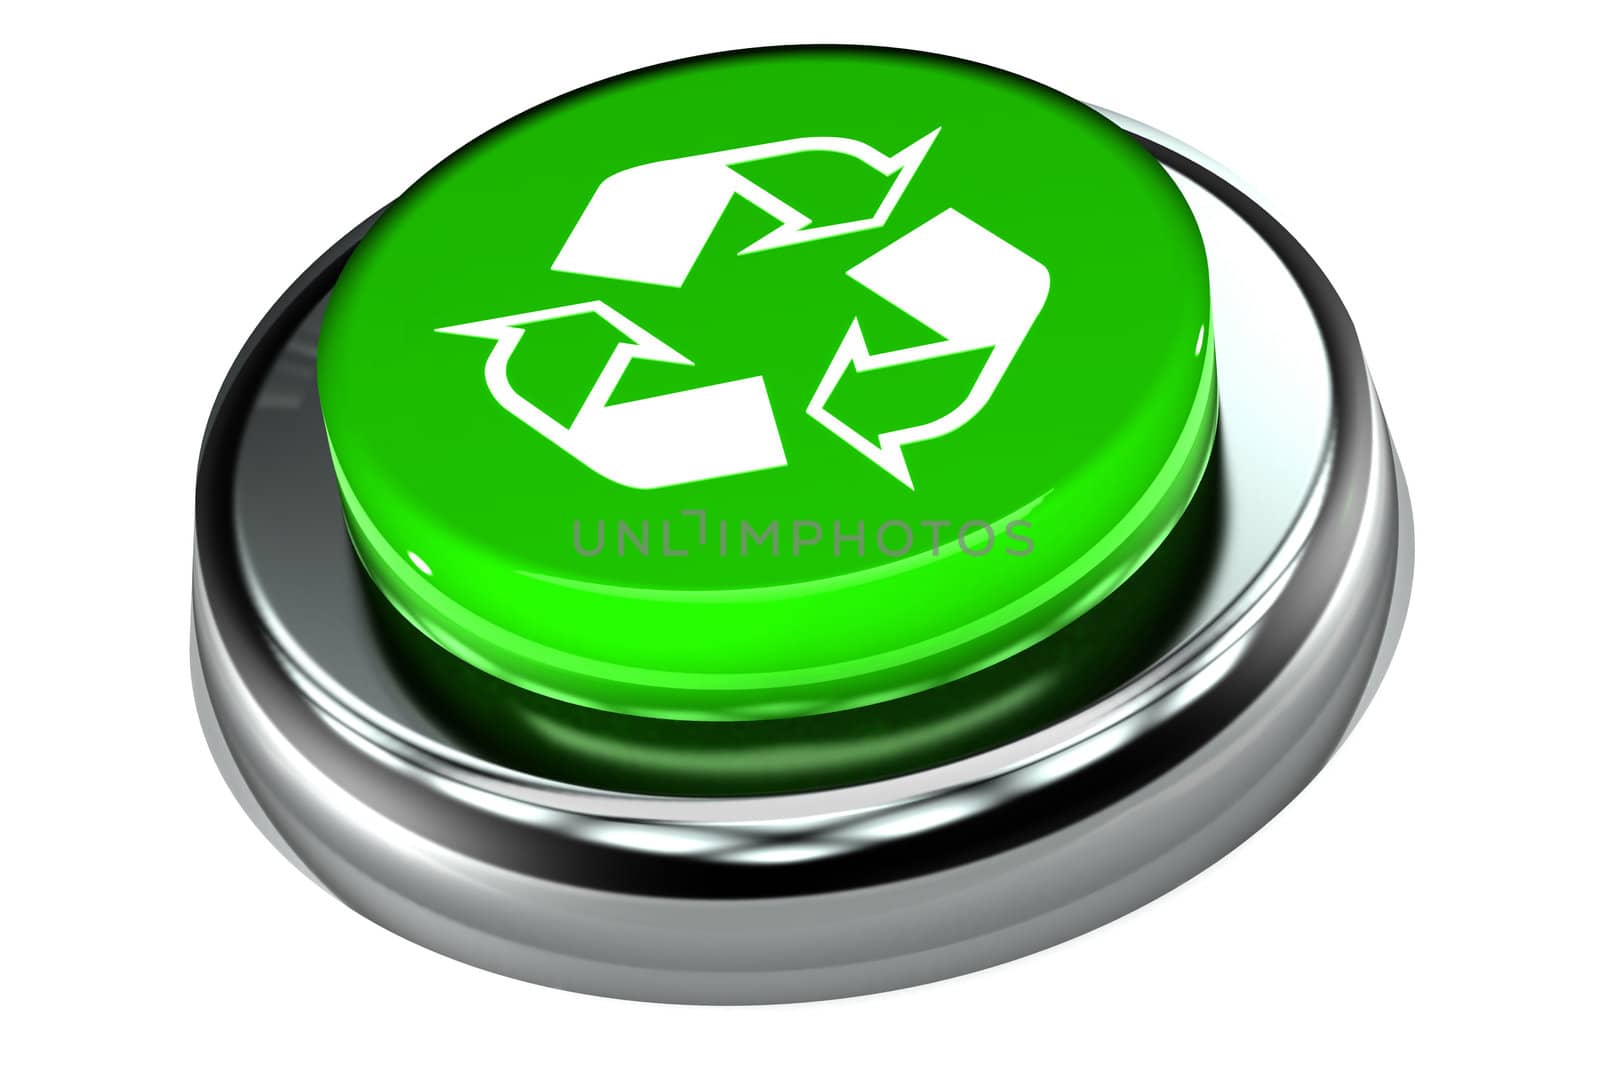 A Colourful 3d Rendered Recycle Button Concept Illustration